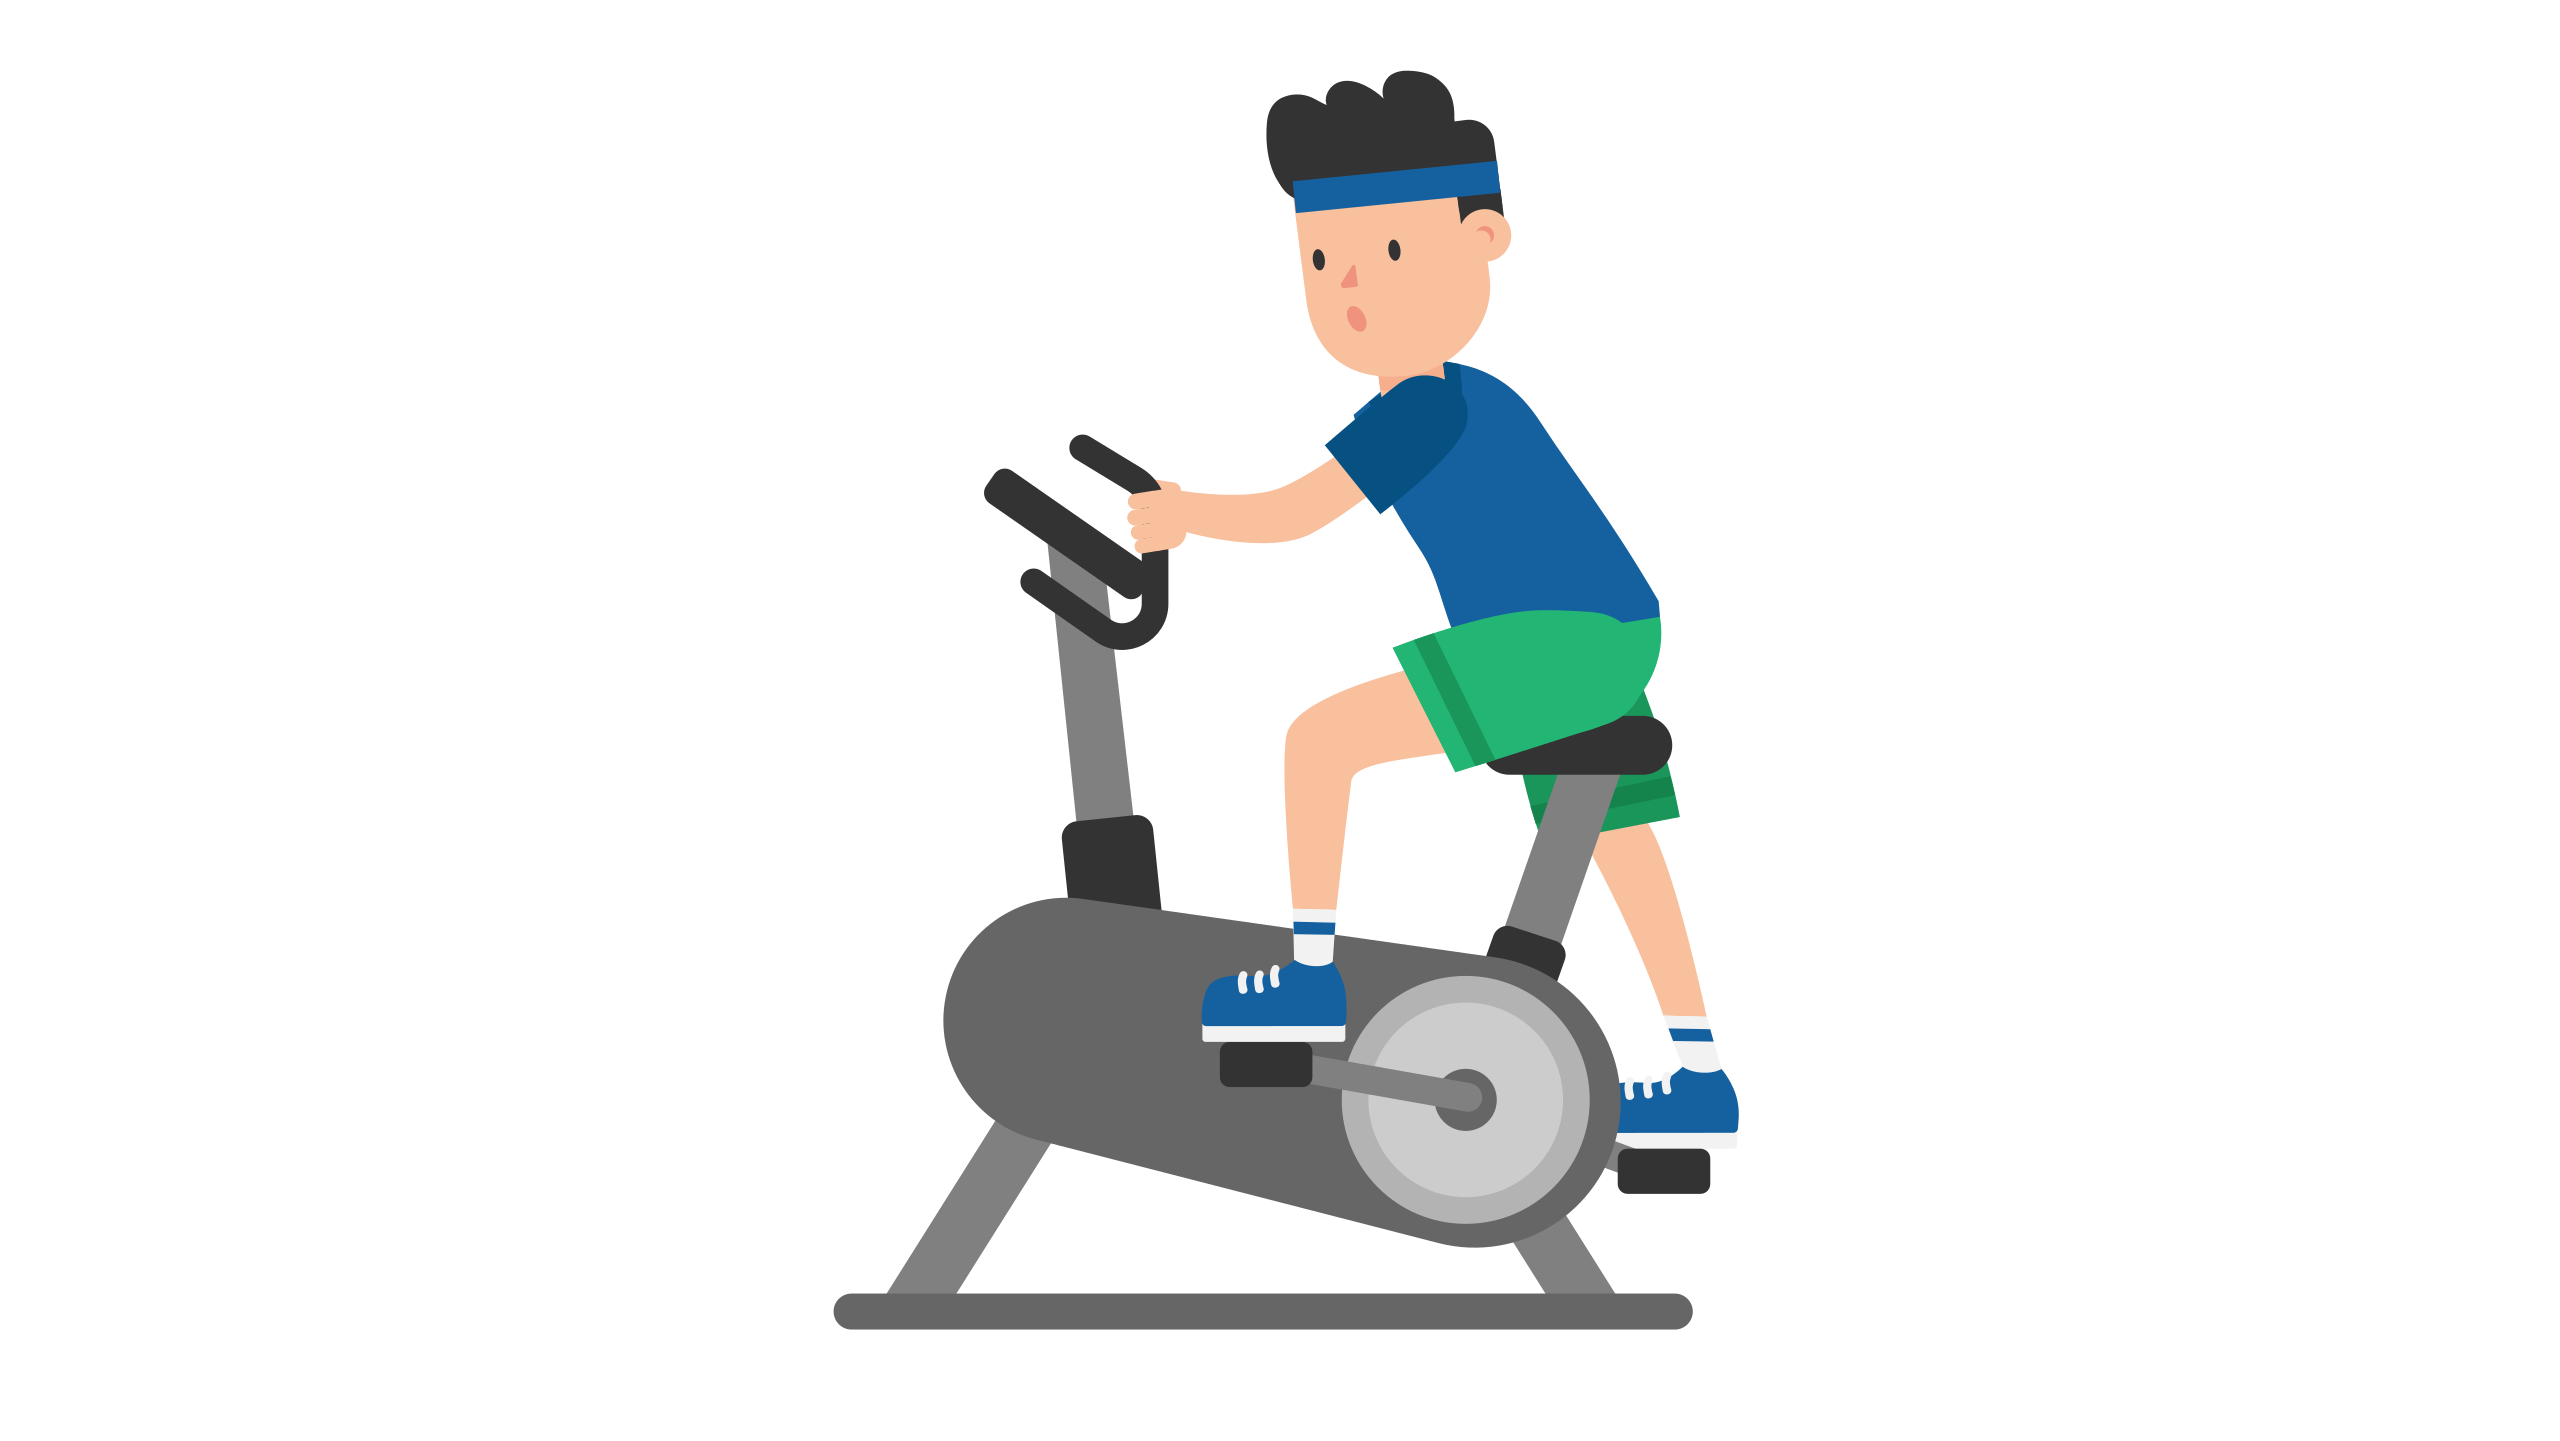 File:Man on an Exercise Bike Cartoon.svg - Wikimedia Commons